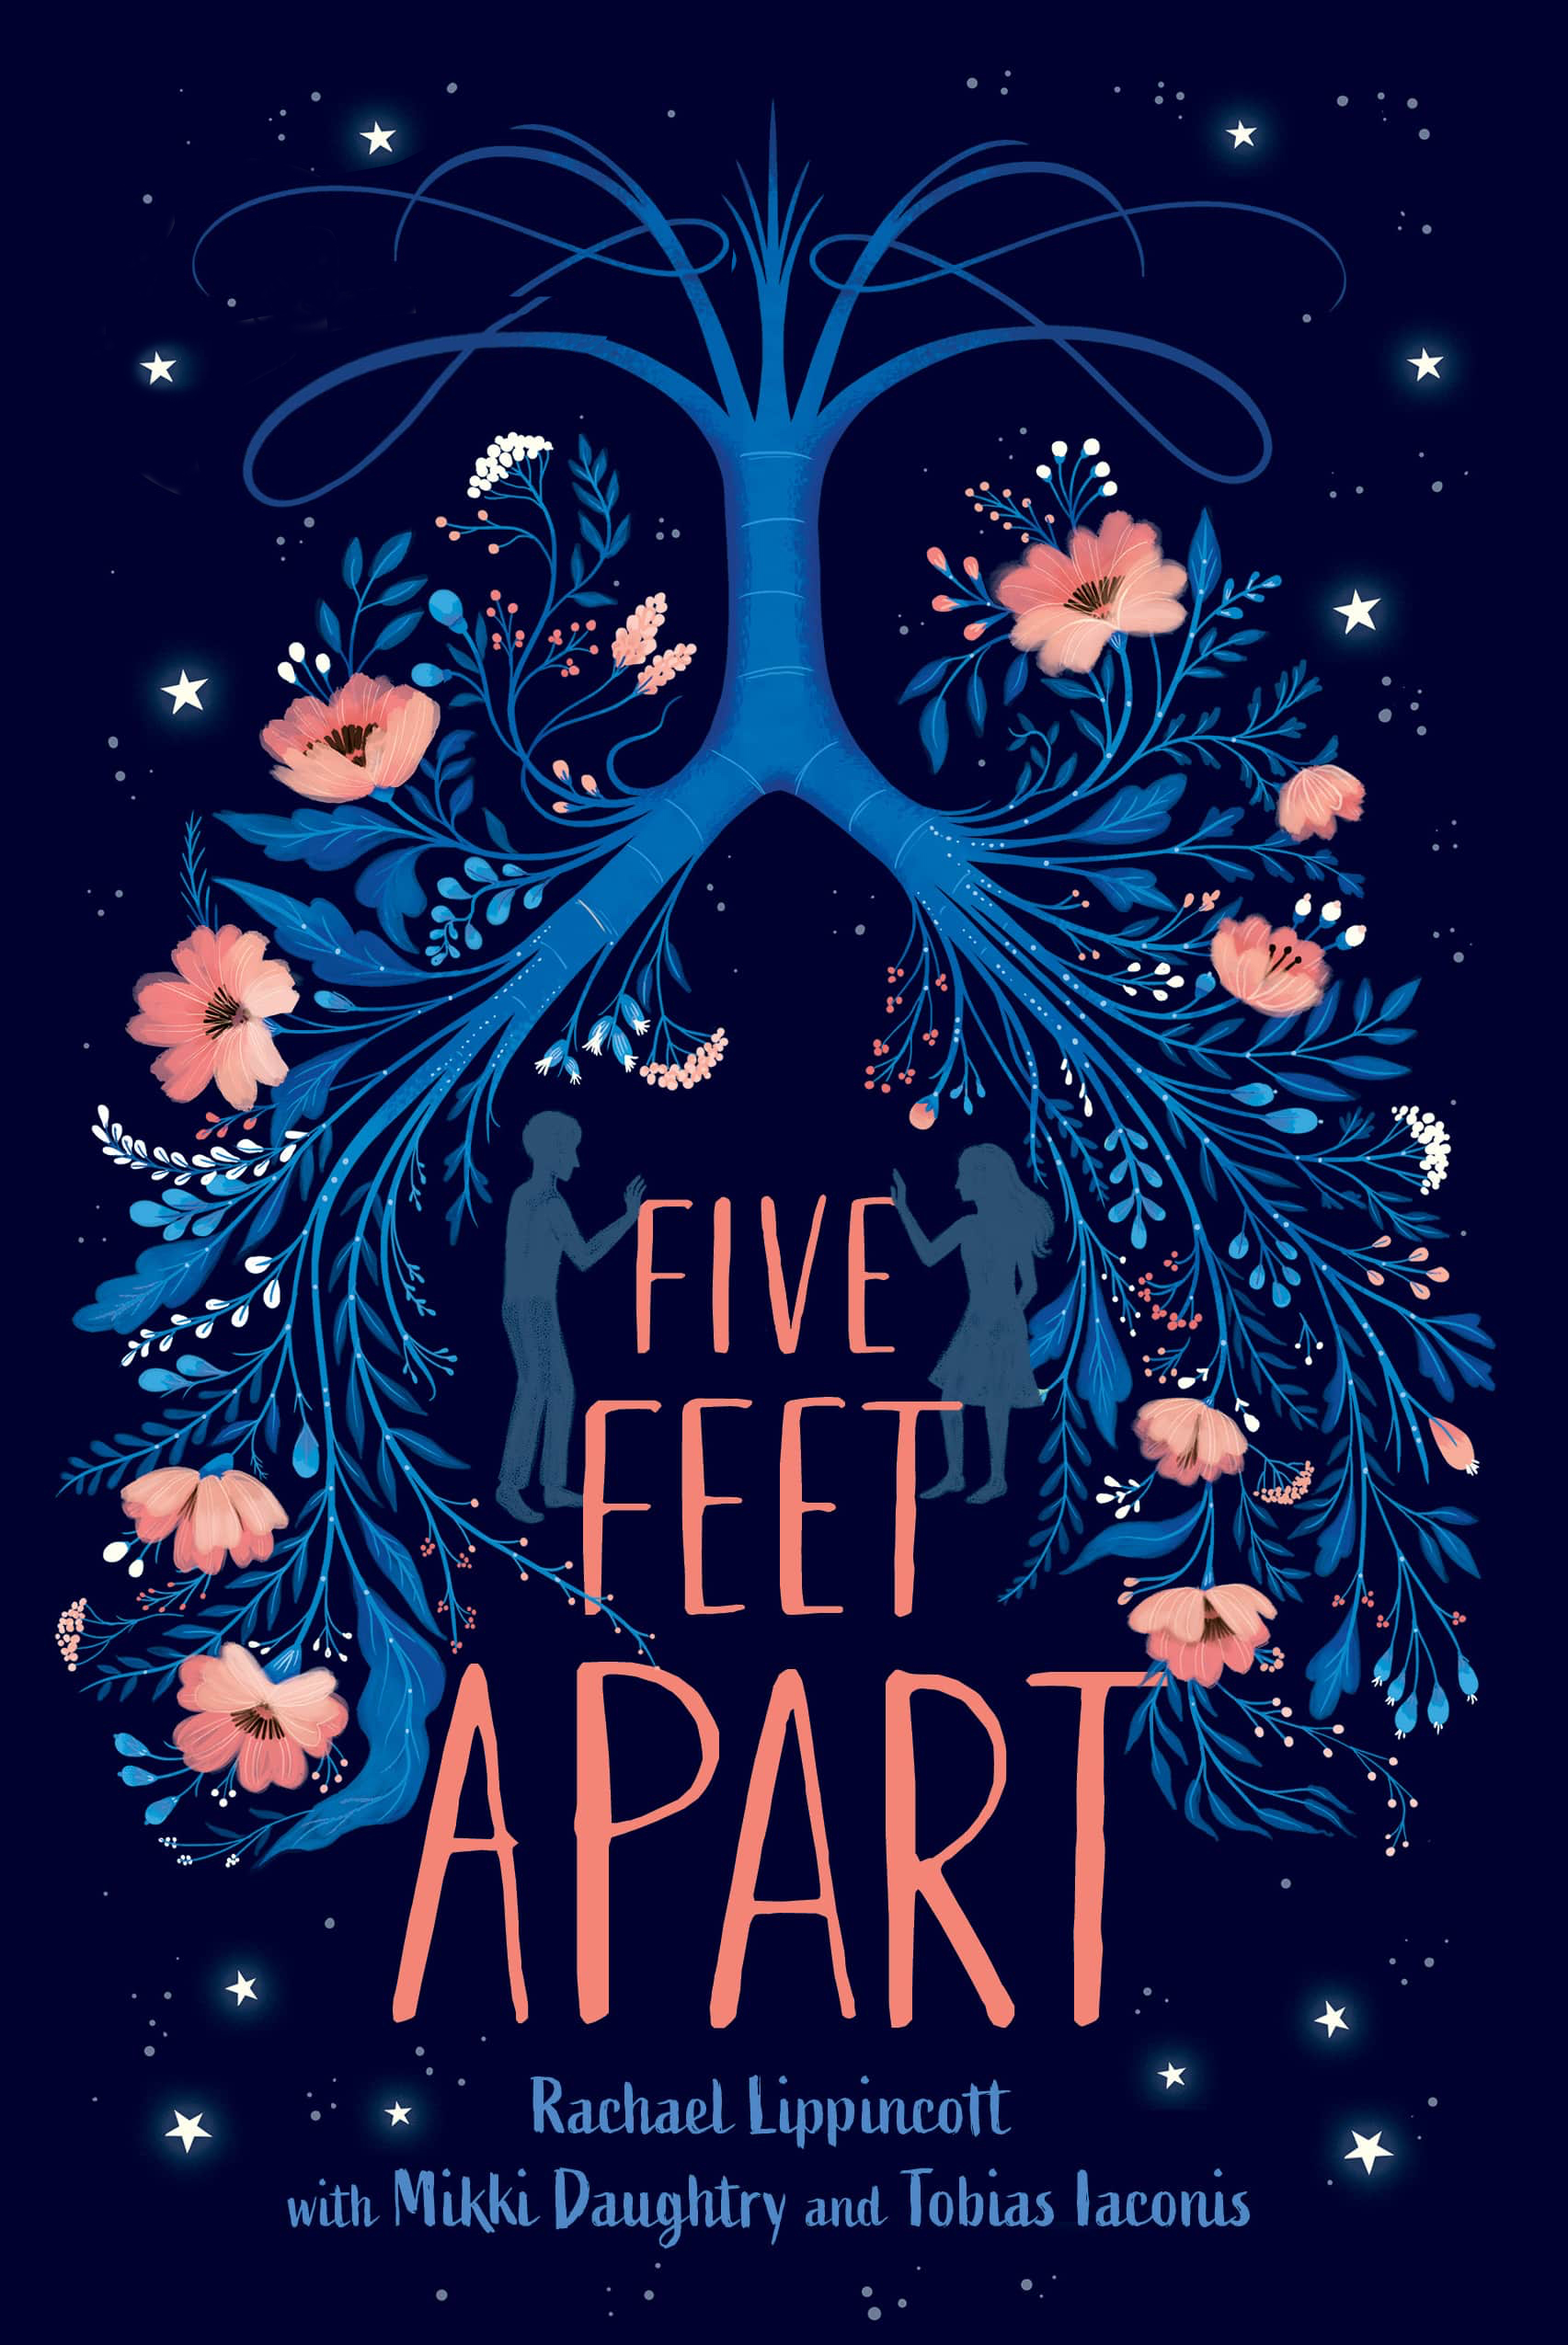 book review on five feet apart